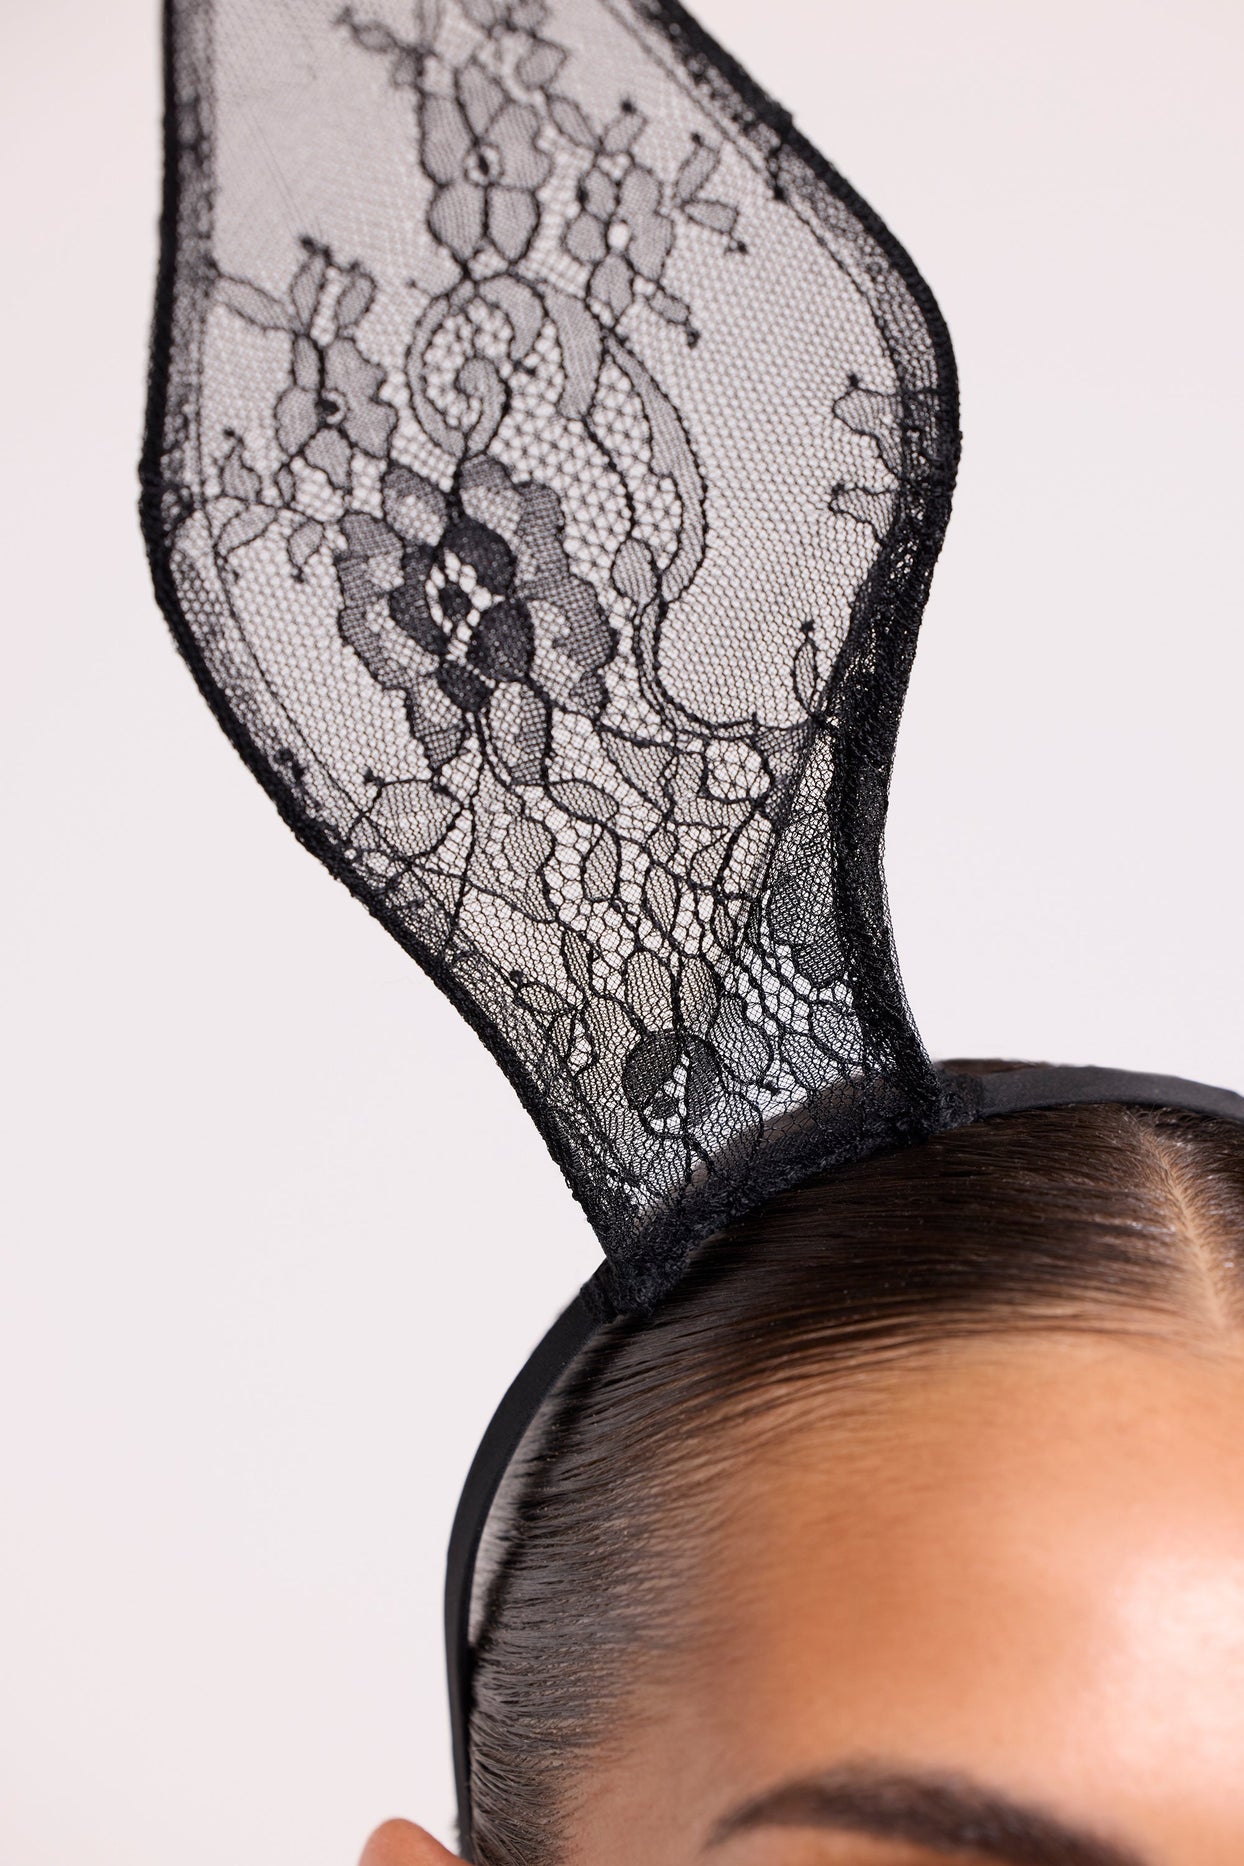 Wired Lace Bunny Ears in Black